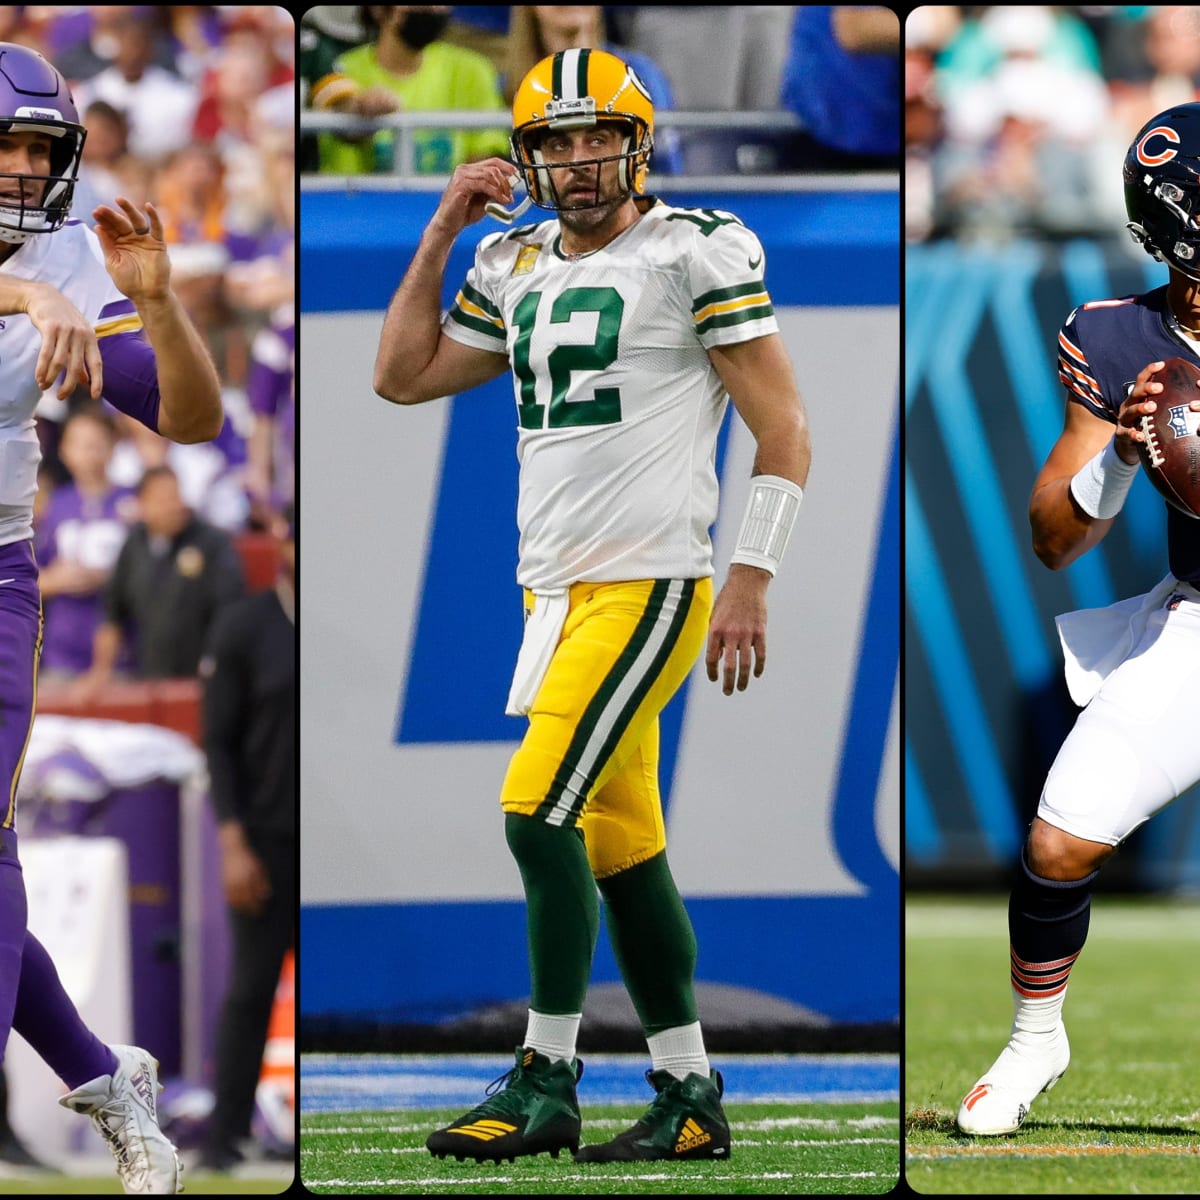 Vikings can clinch NFC North title on Sunday, with 5 weeks left in